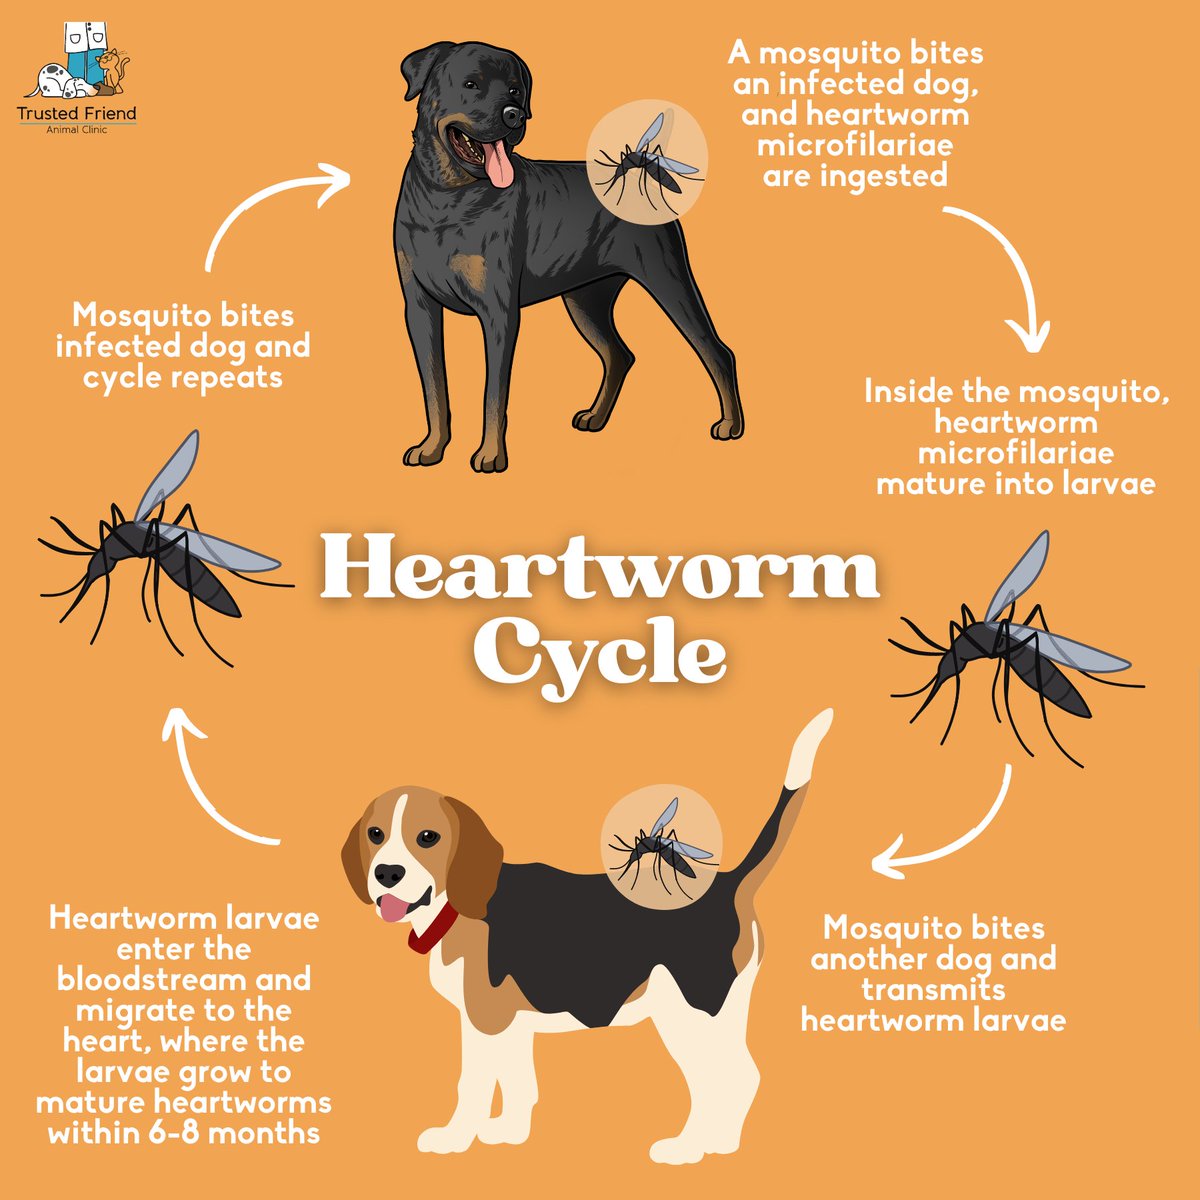 Have you ever wondered how heartworm is transmitted? Here are the steps to the heartworm cycle. #HeartwormAwarenessMonth